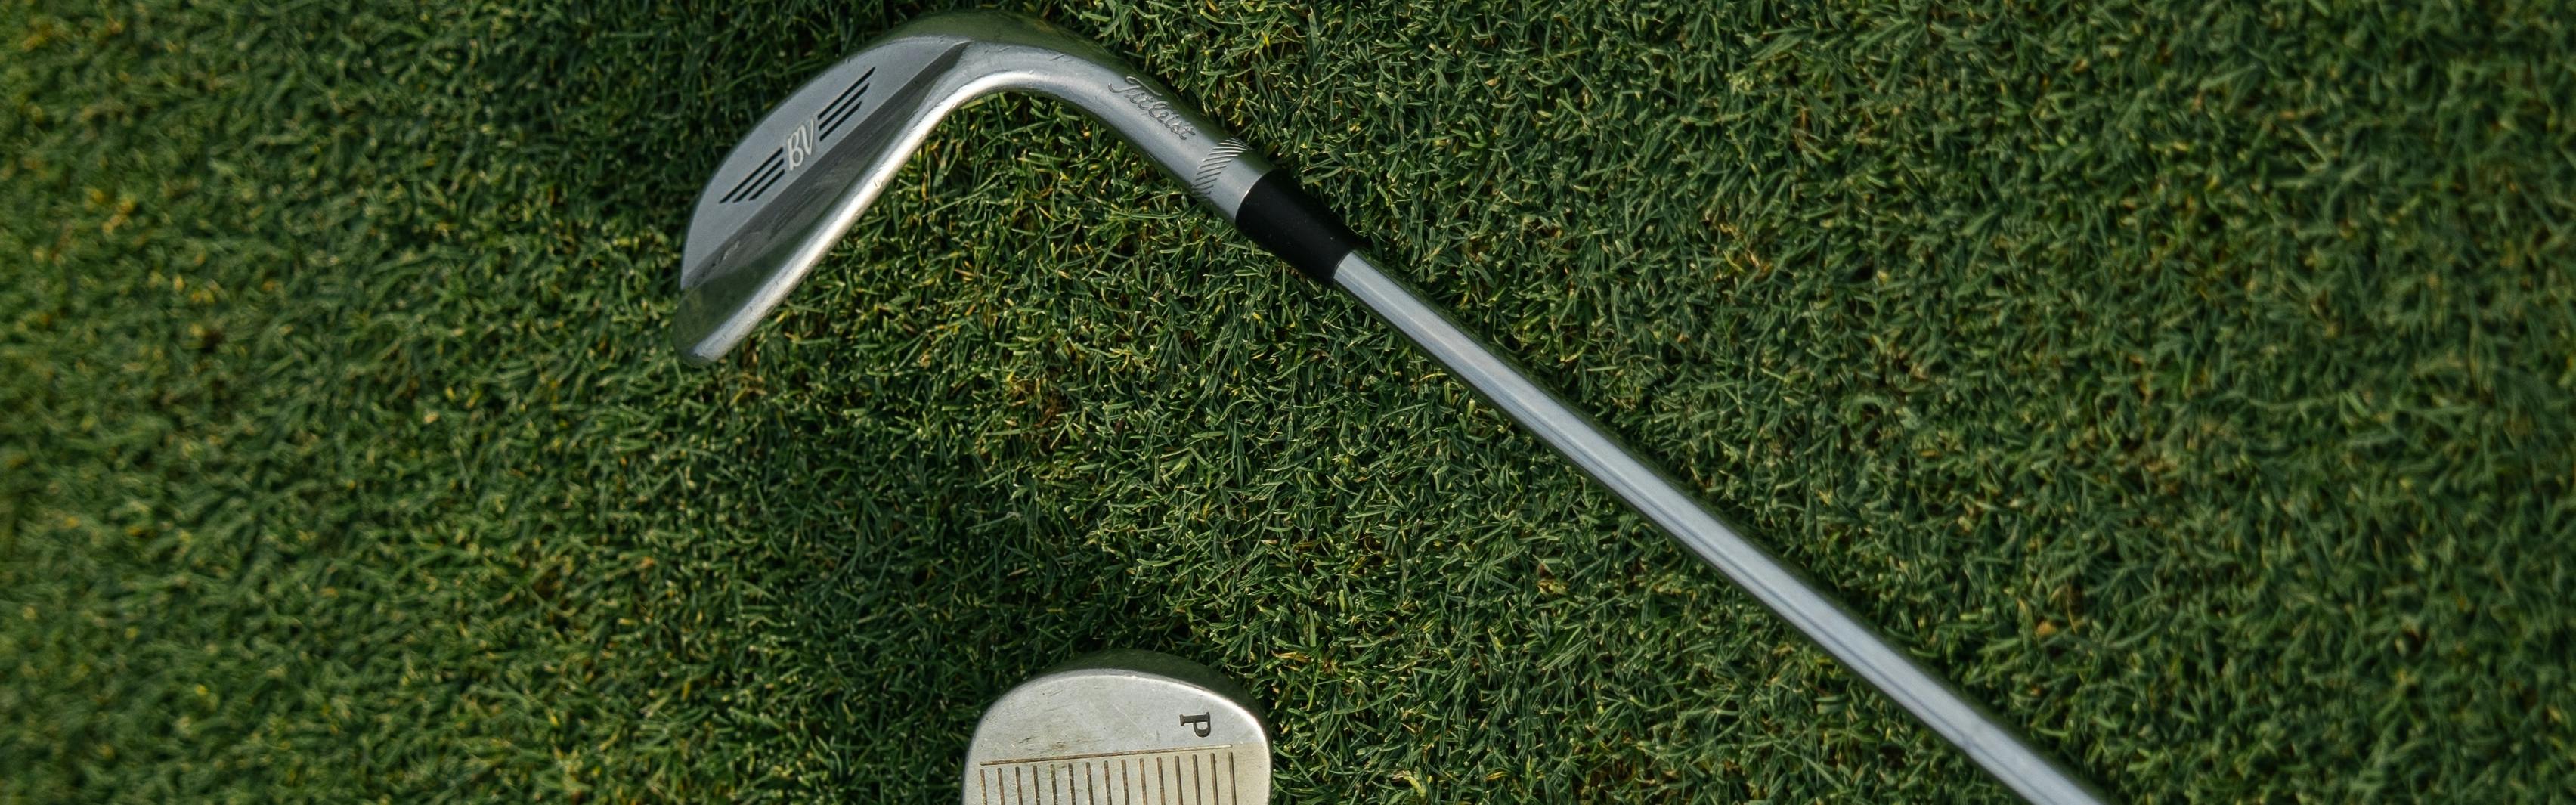 Two golf clubs lying on the grass.